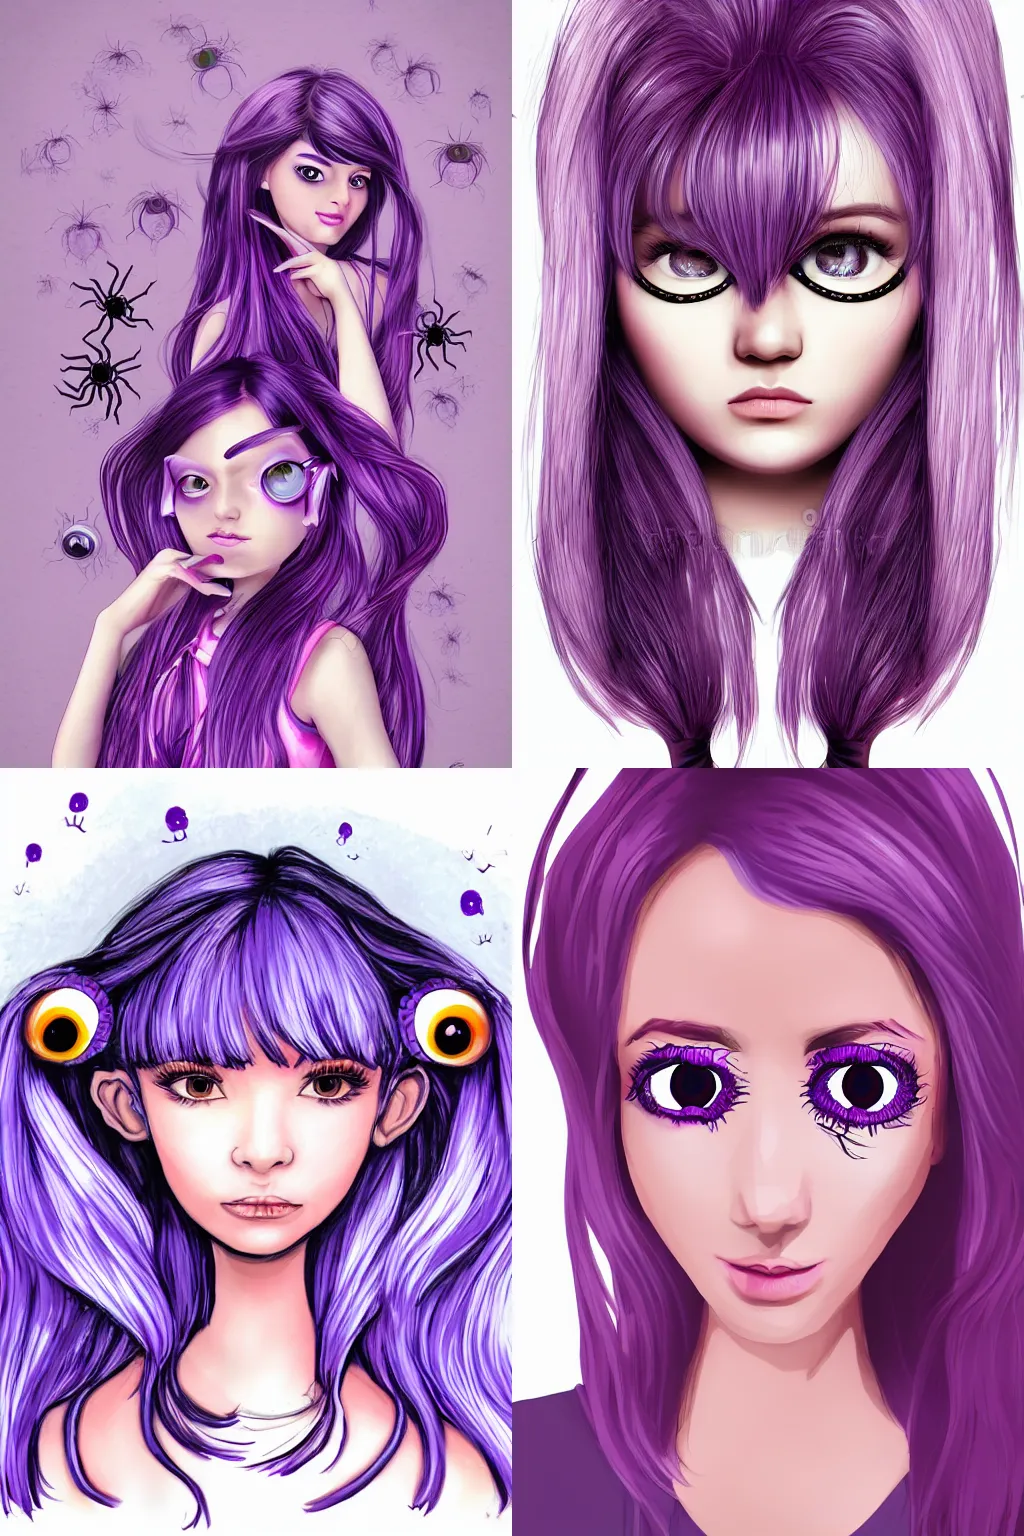 Prompt: Purple cute beautiful woman with 5 spider eyes and side pigtails, amazing illustration art portrait